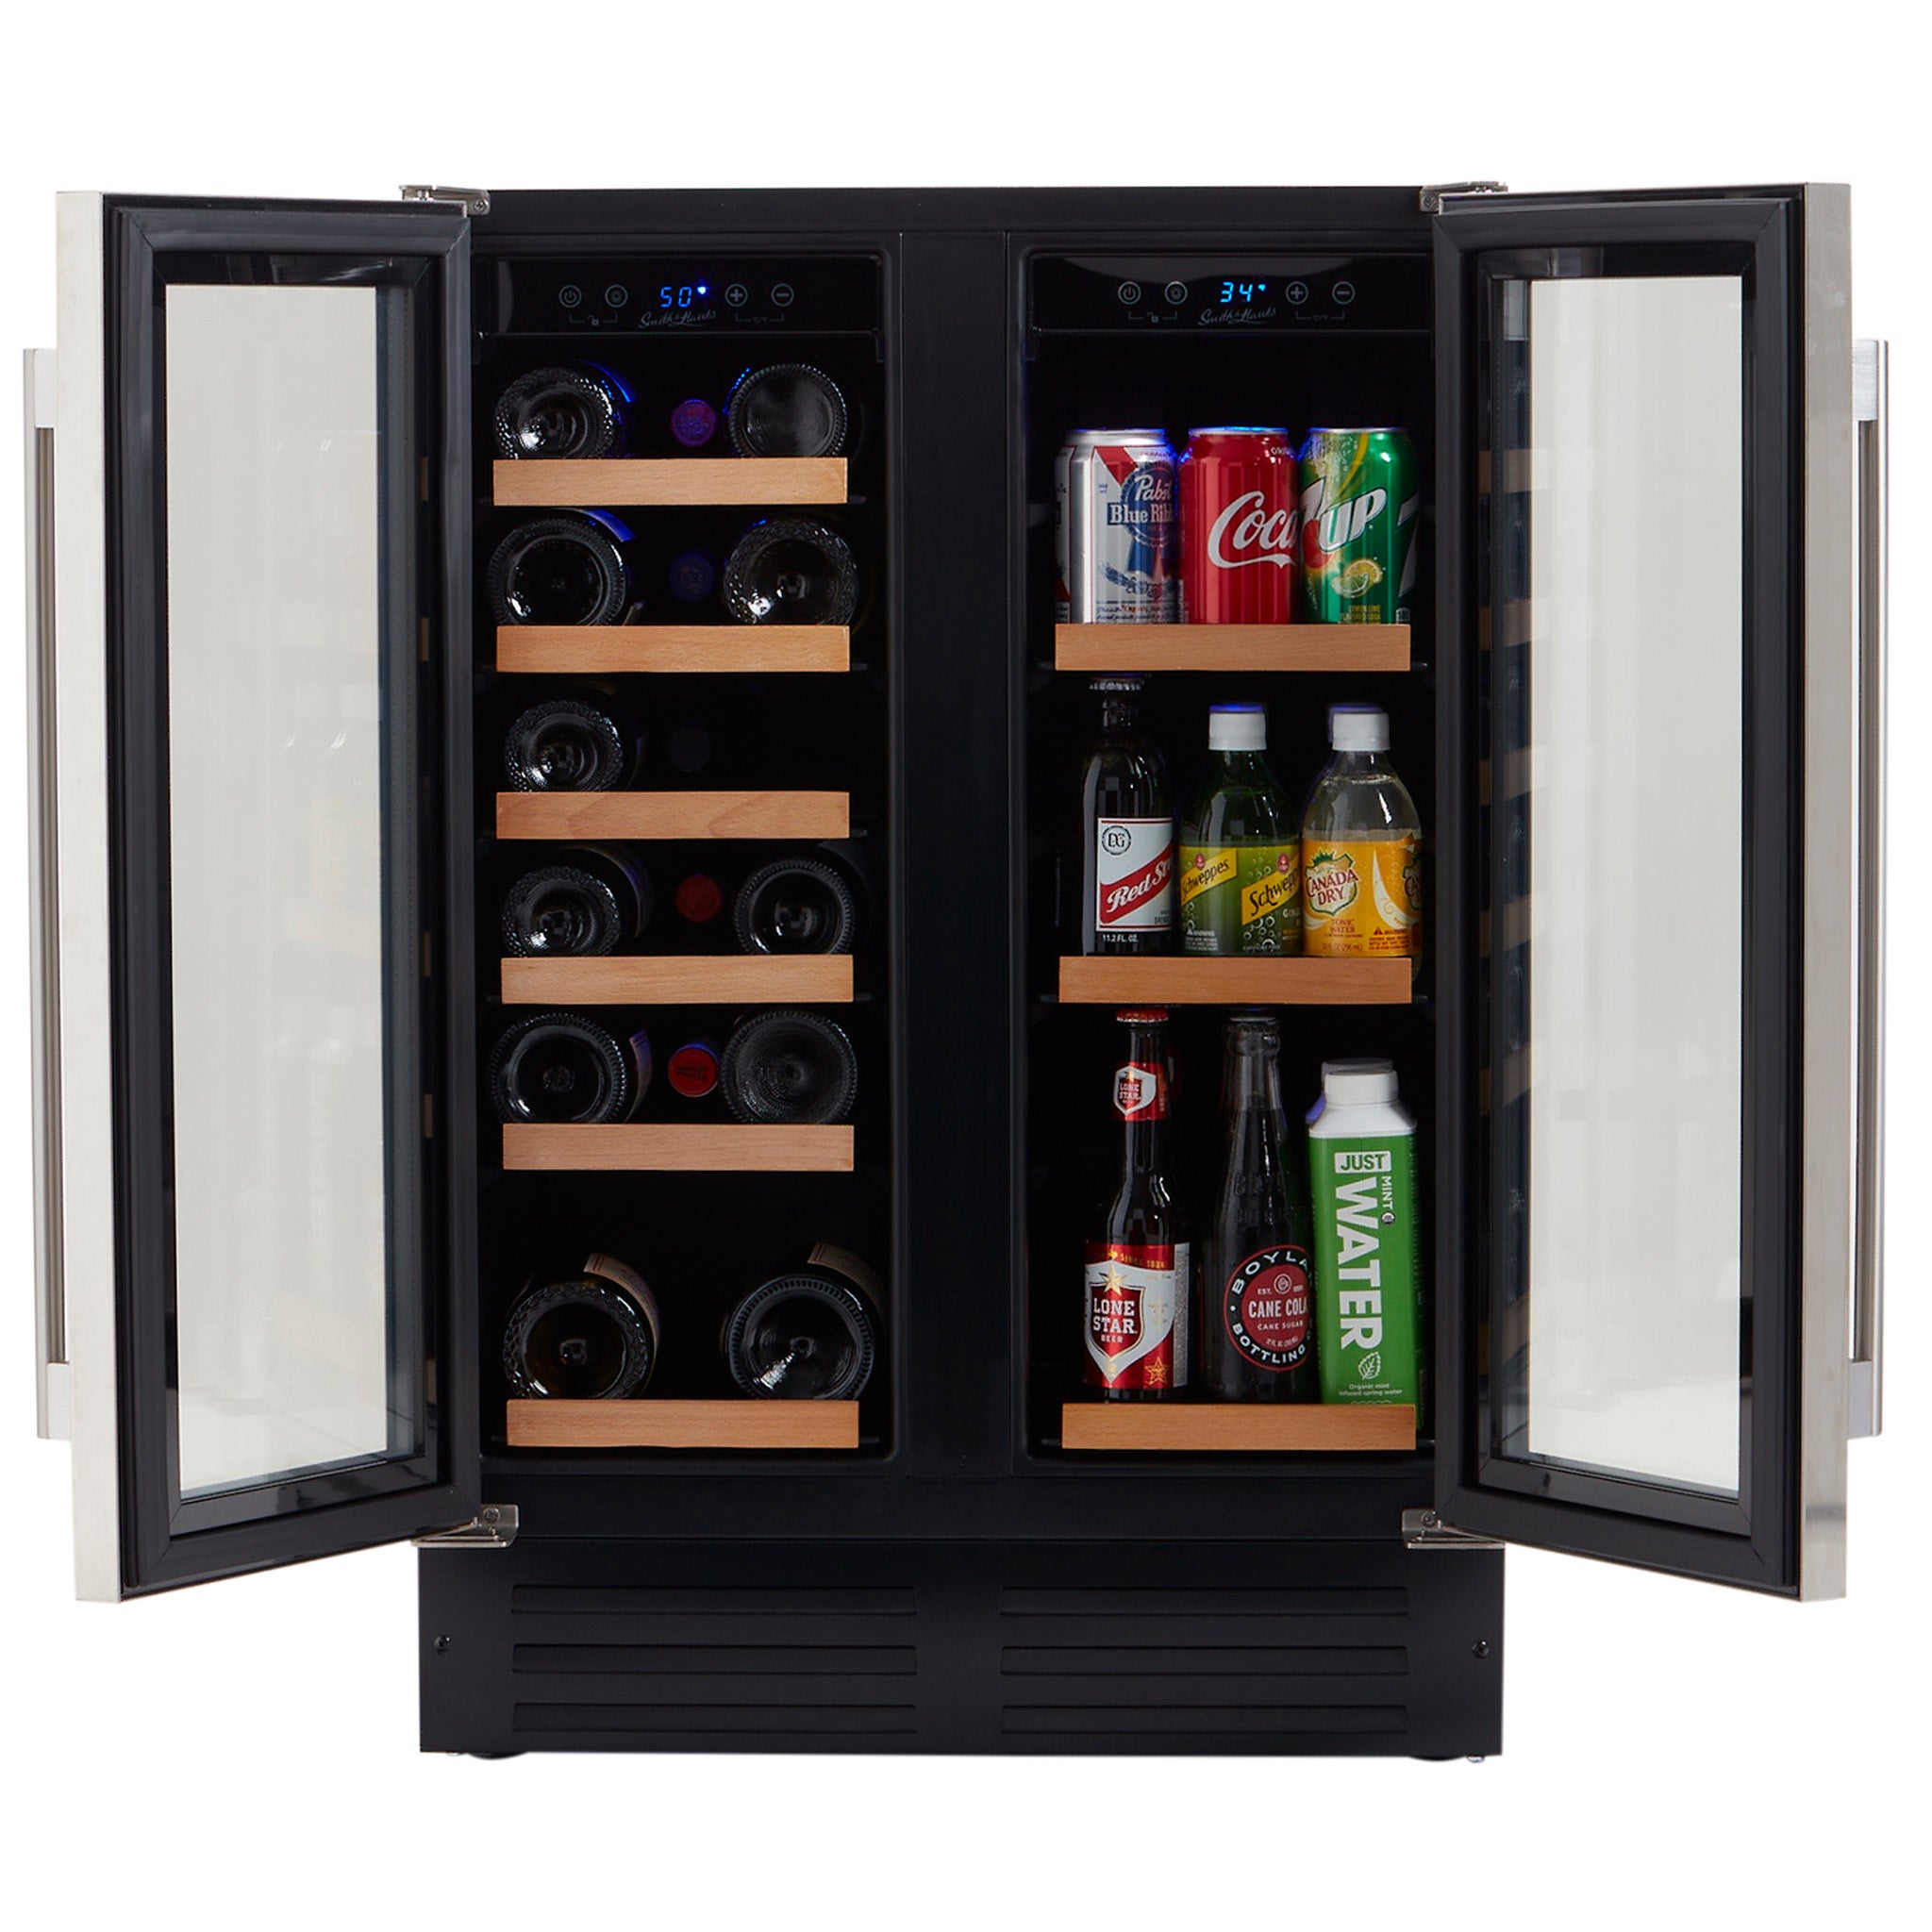 Smith & Hanks - 24" Dual Zone Stainless Steel Trim Under Counter Wine and Beverage Center (RE100055)